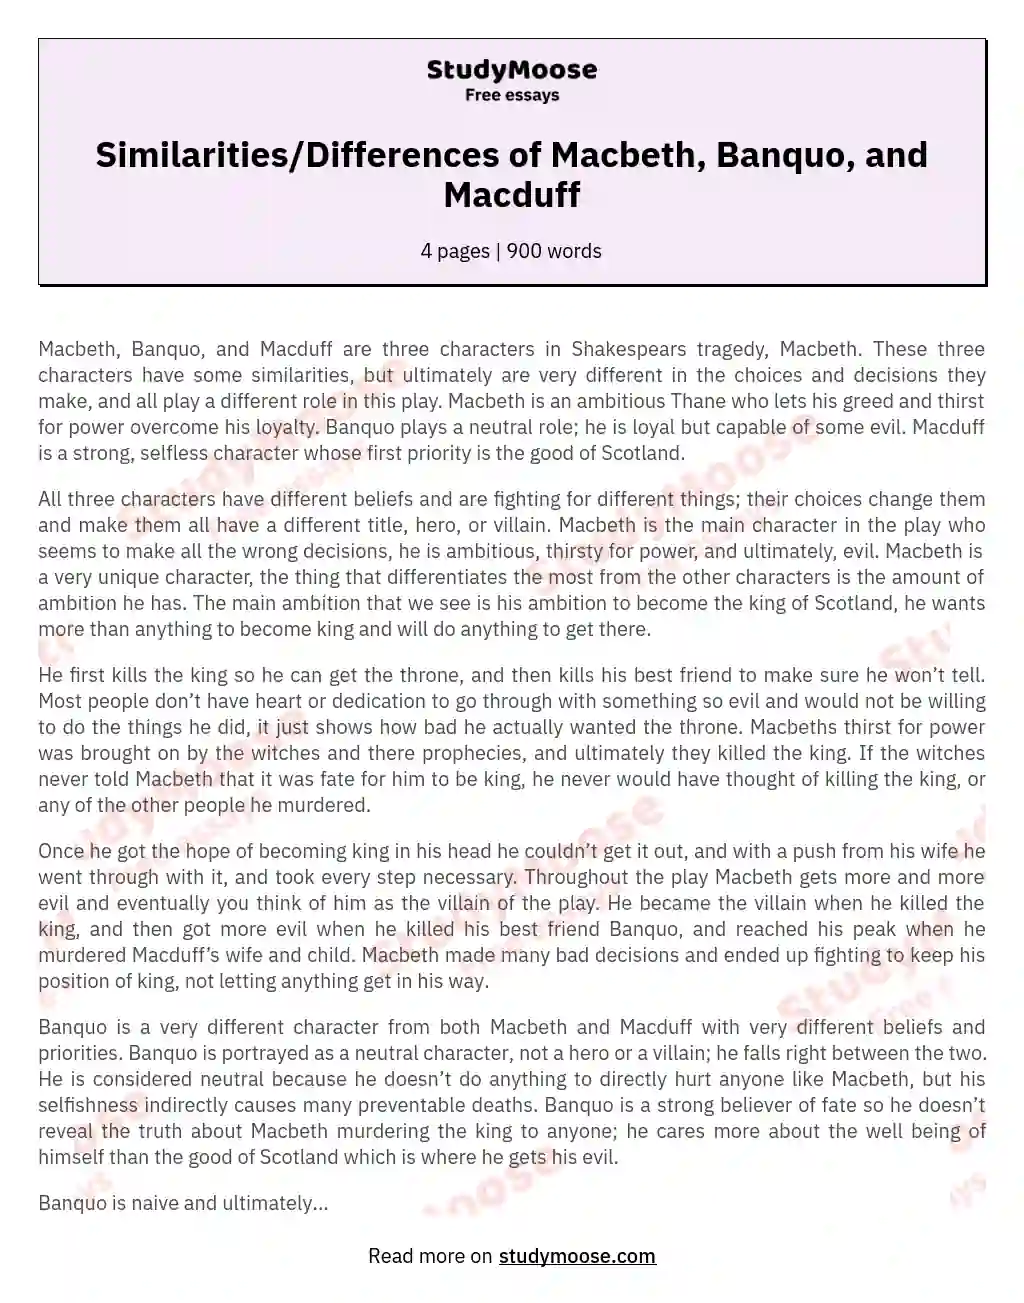 Similarities/Differences of Macbeth, Banquo, and Macduff essay